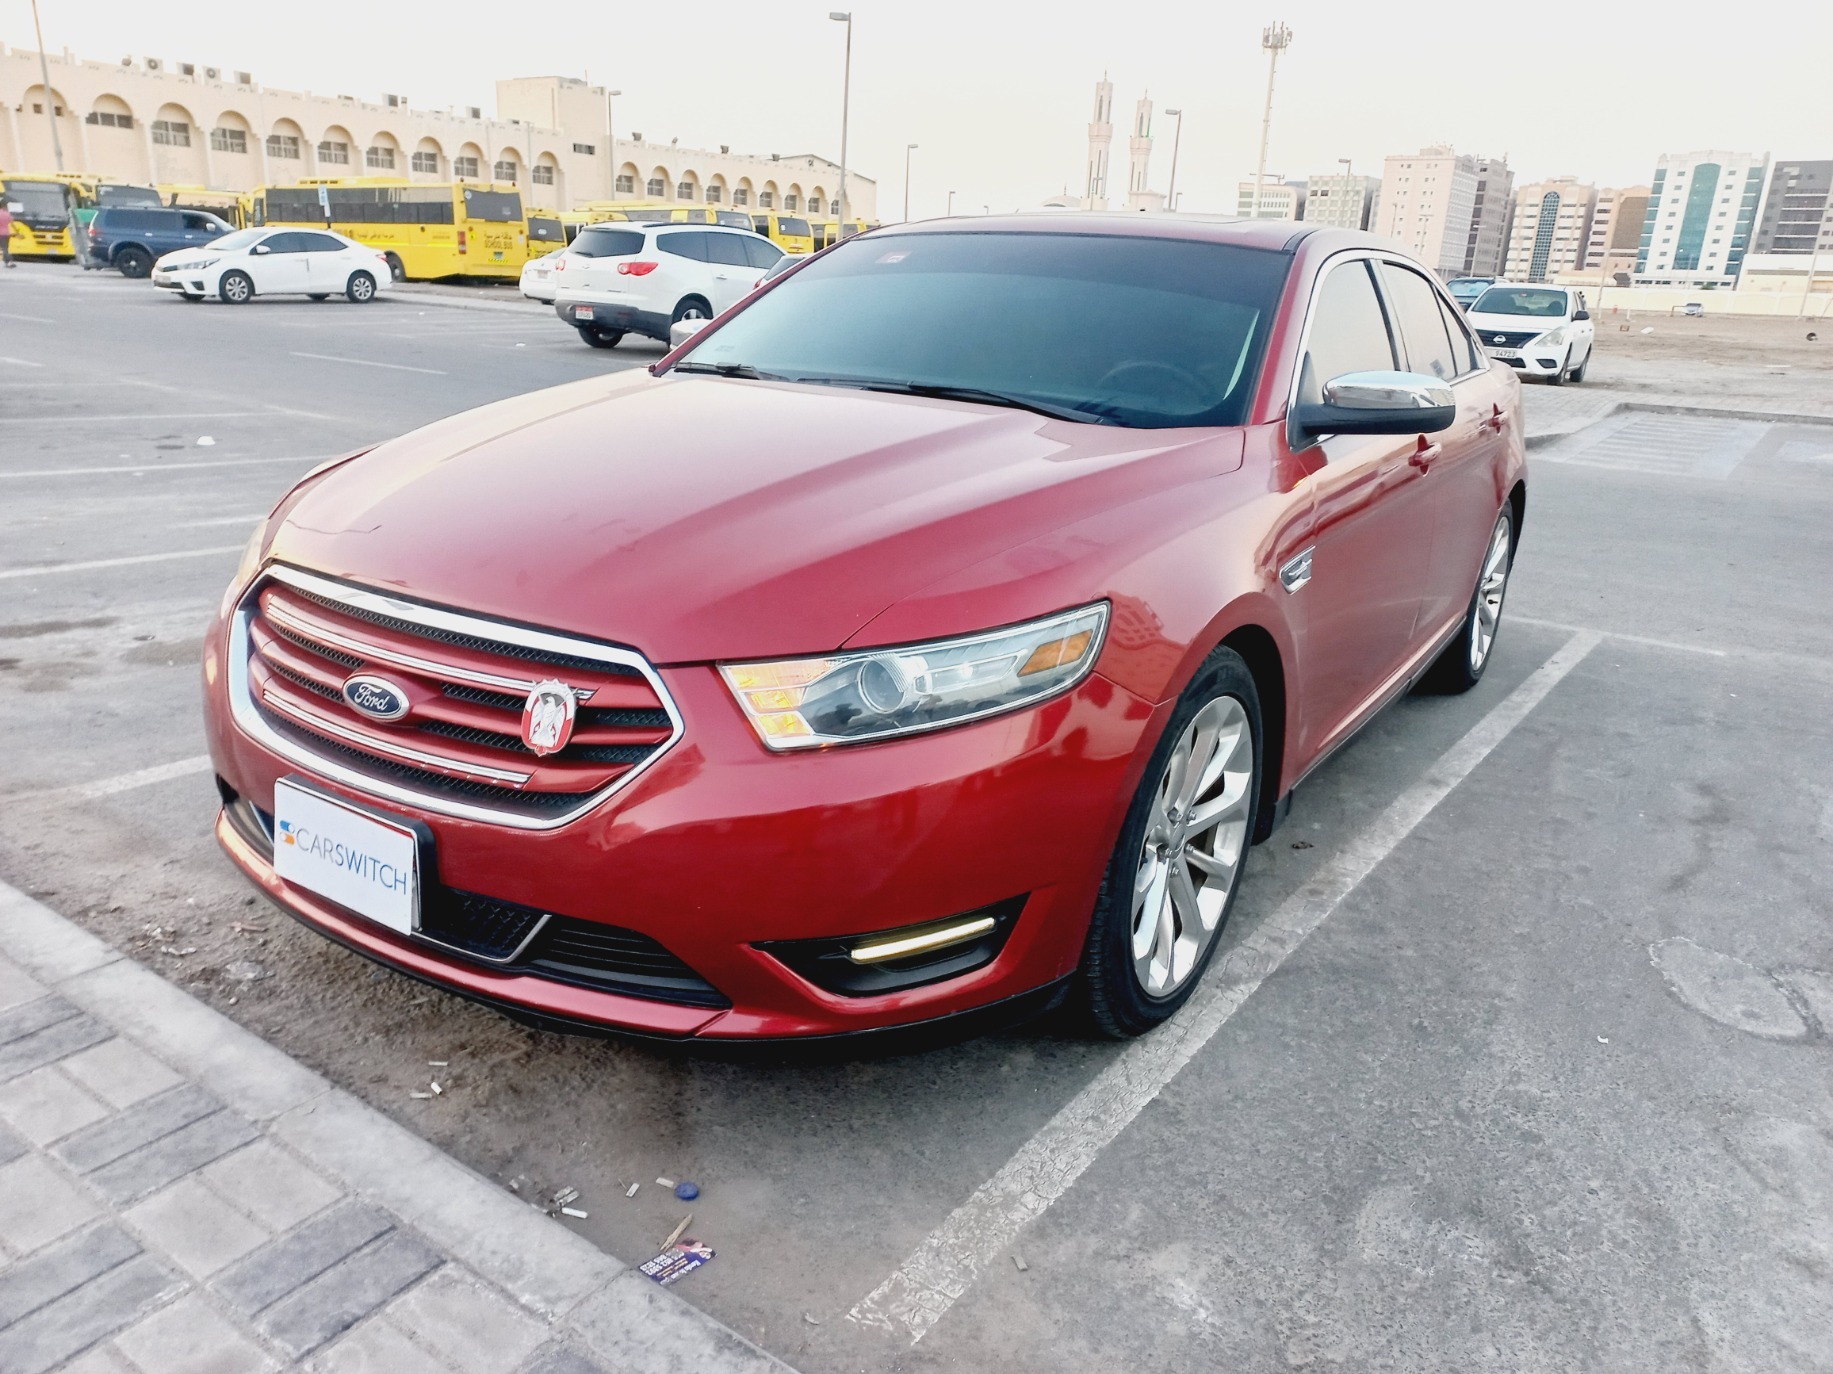 Used Ford Taurus 2011 Price In Uae Specs And Reviews For Dubai Abu